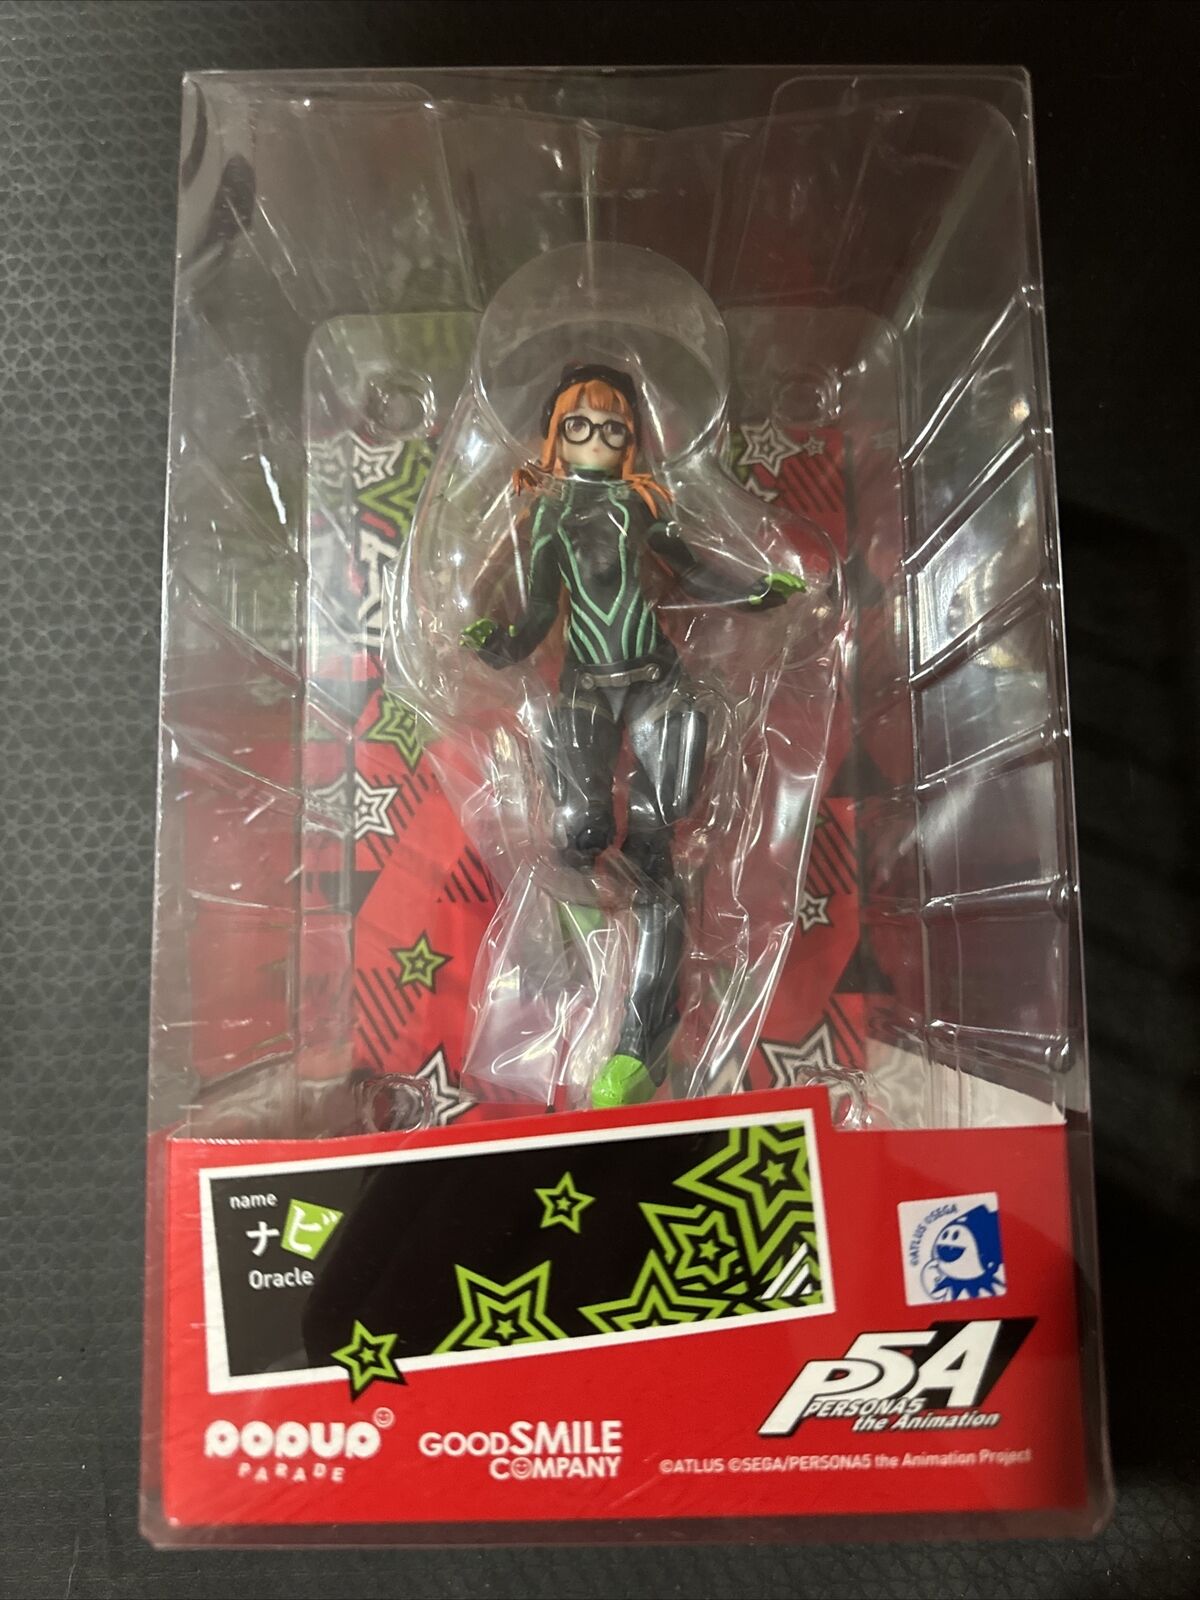 *NEW* Persona 5 the Animation: Oracle Pop Up Parade Figure